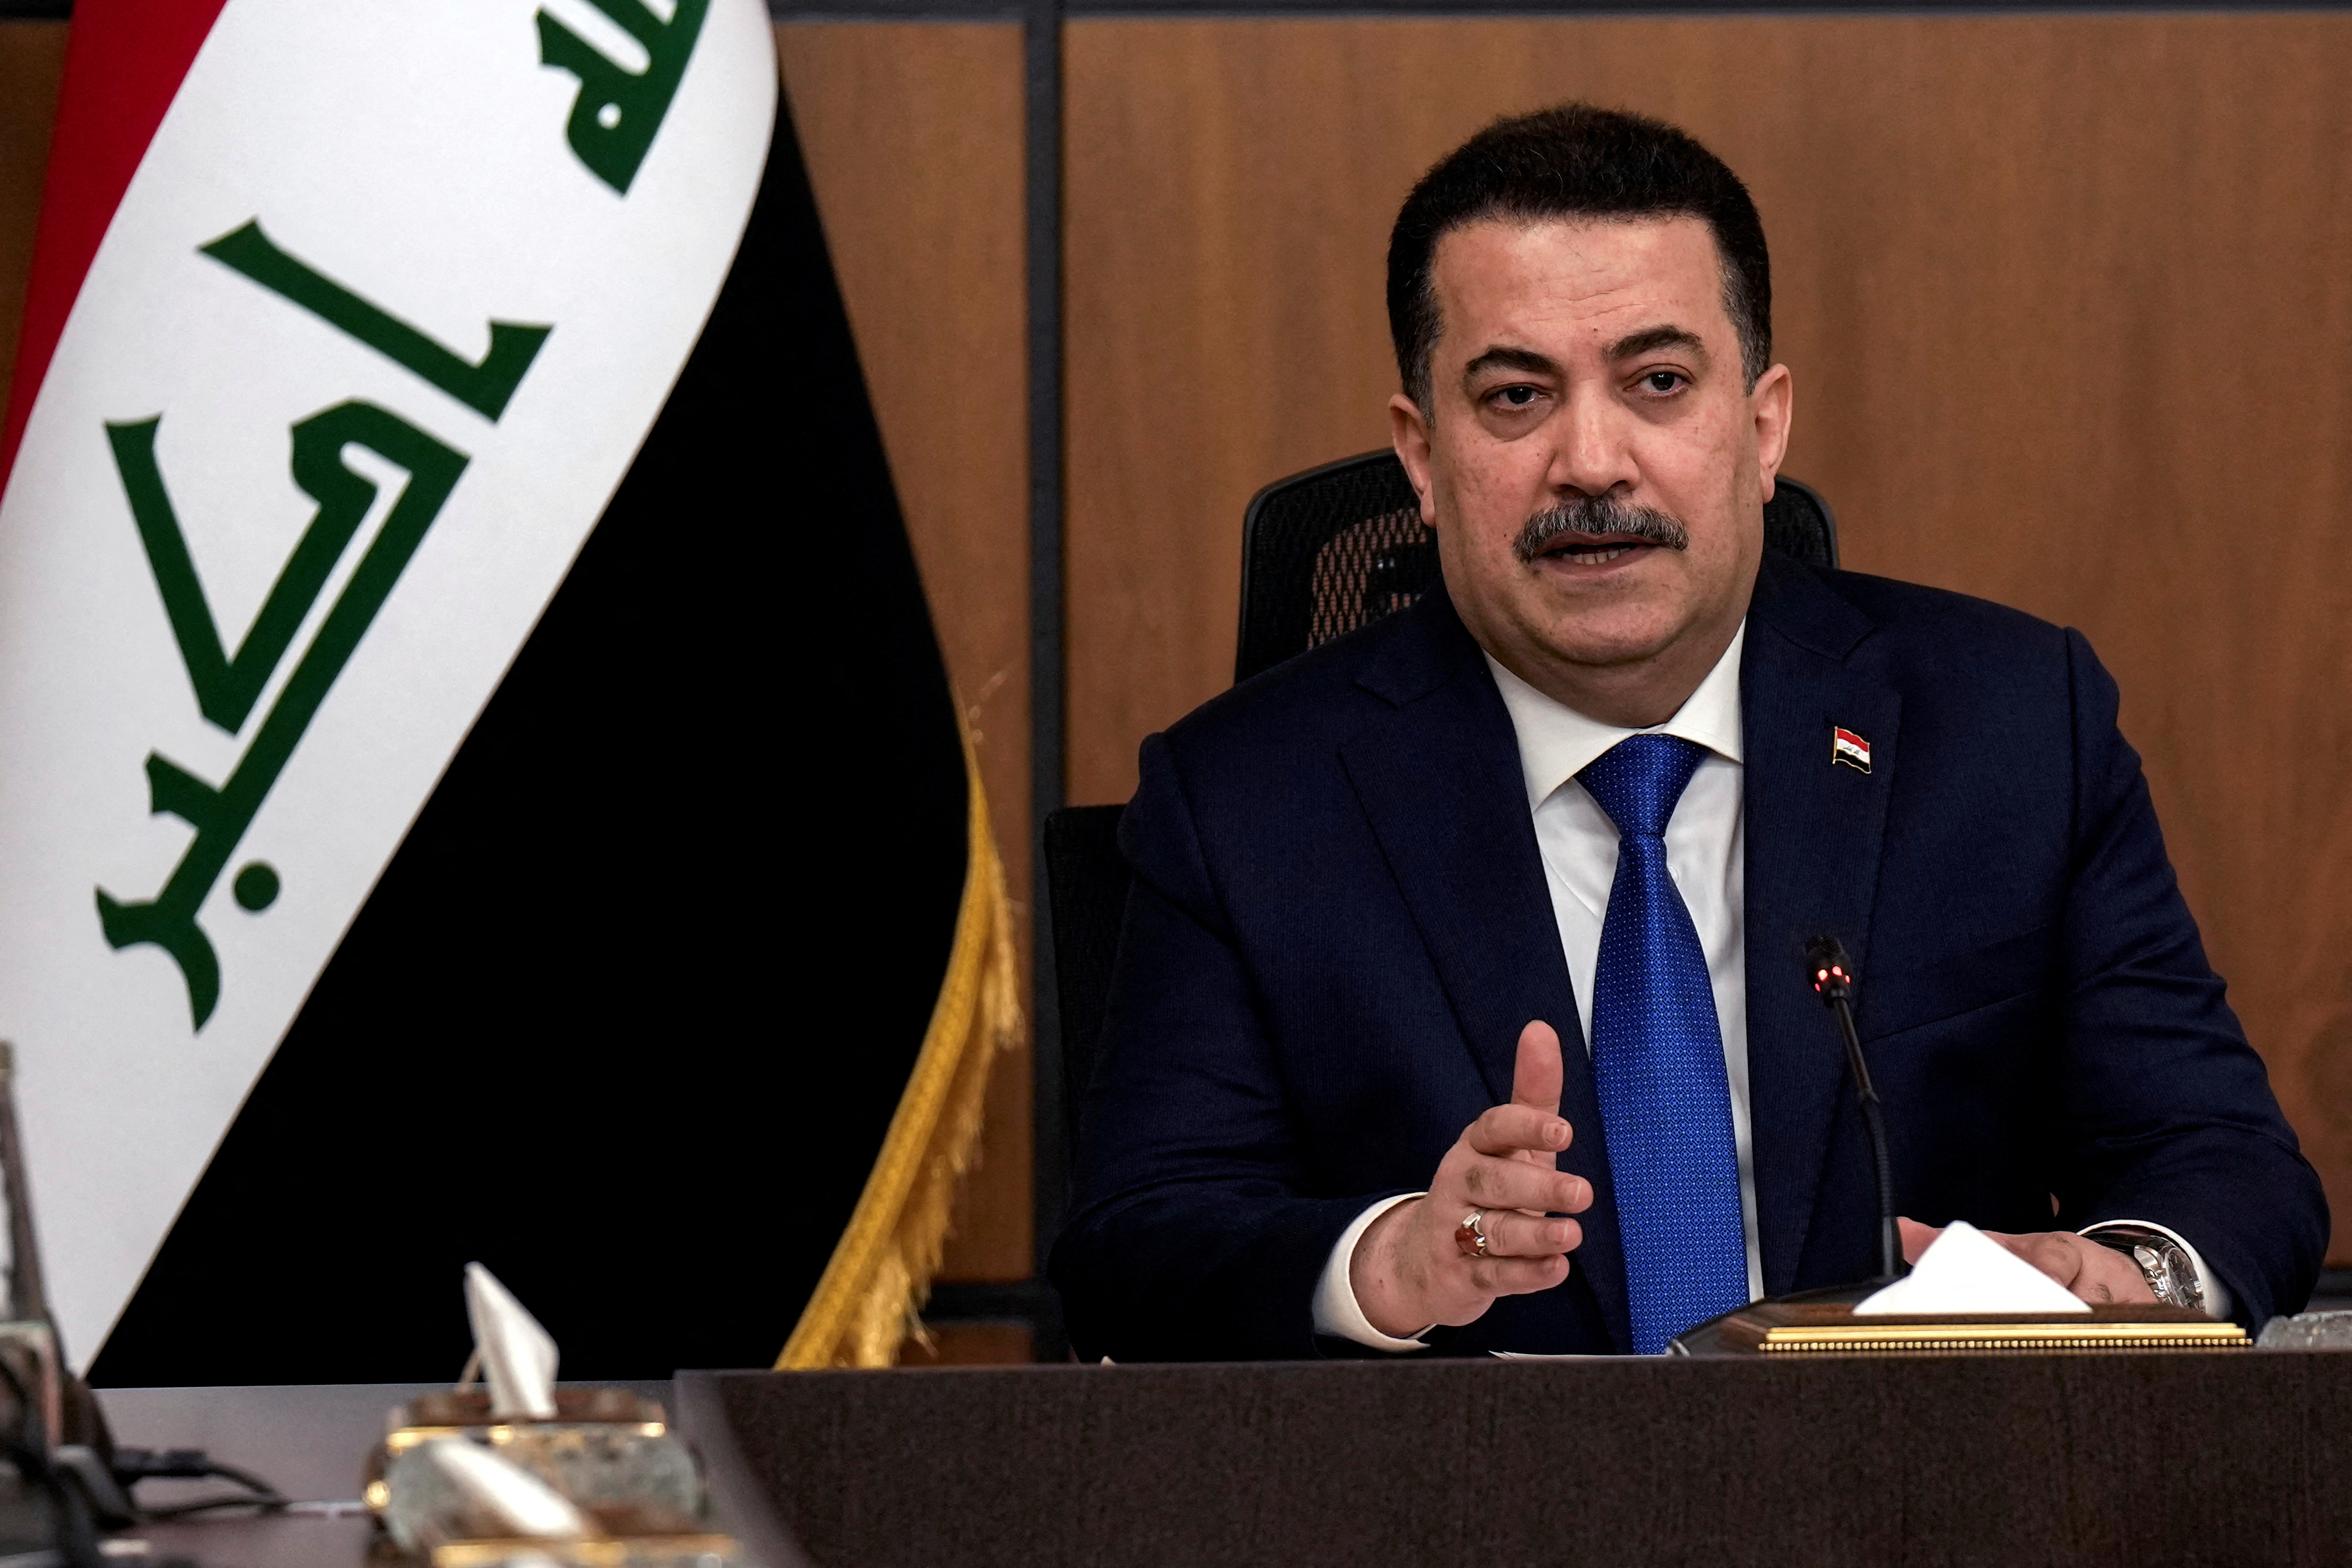 Iraqi Prime Minister Mohammed Shia al-Sudani attends the first session of negotiations between Iraq and the United States to end the International Coalition mission in Baghdad